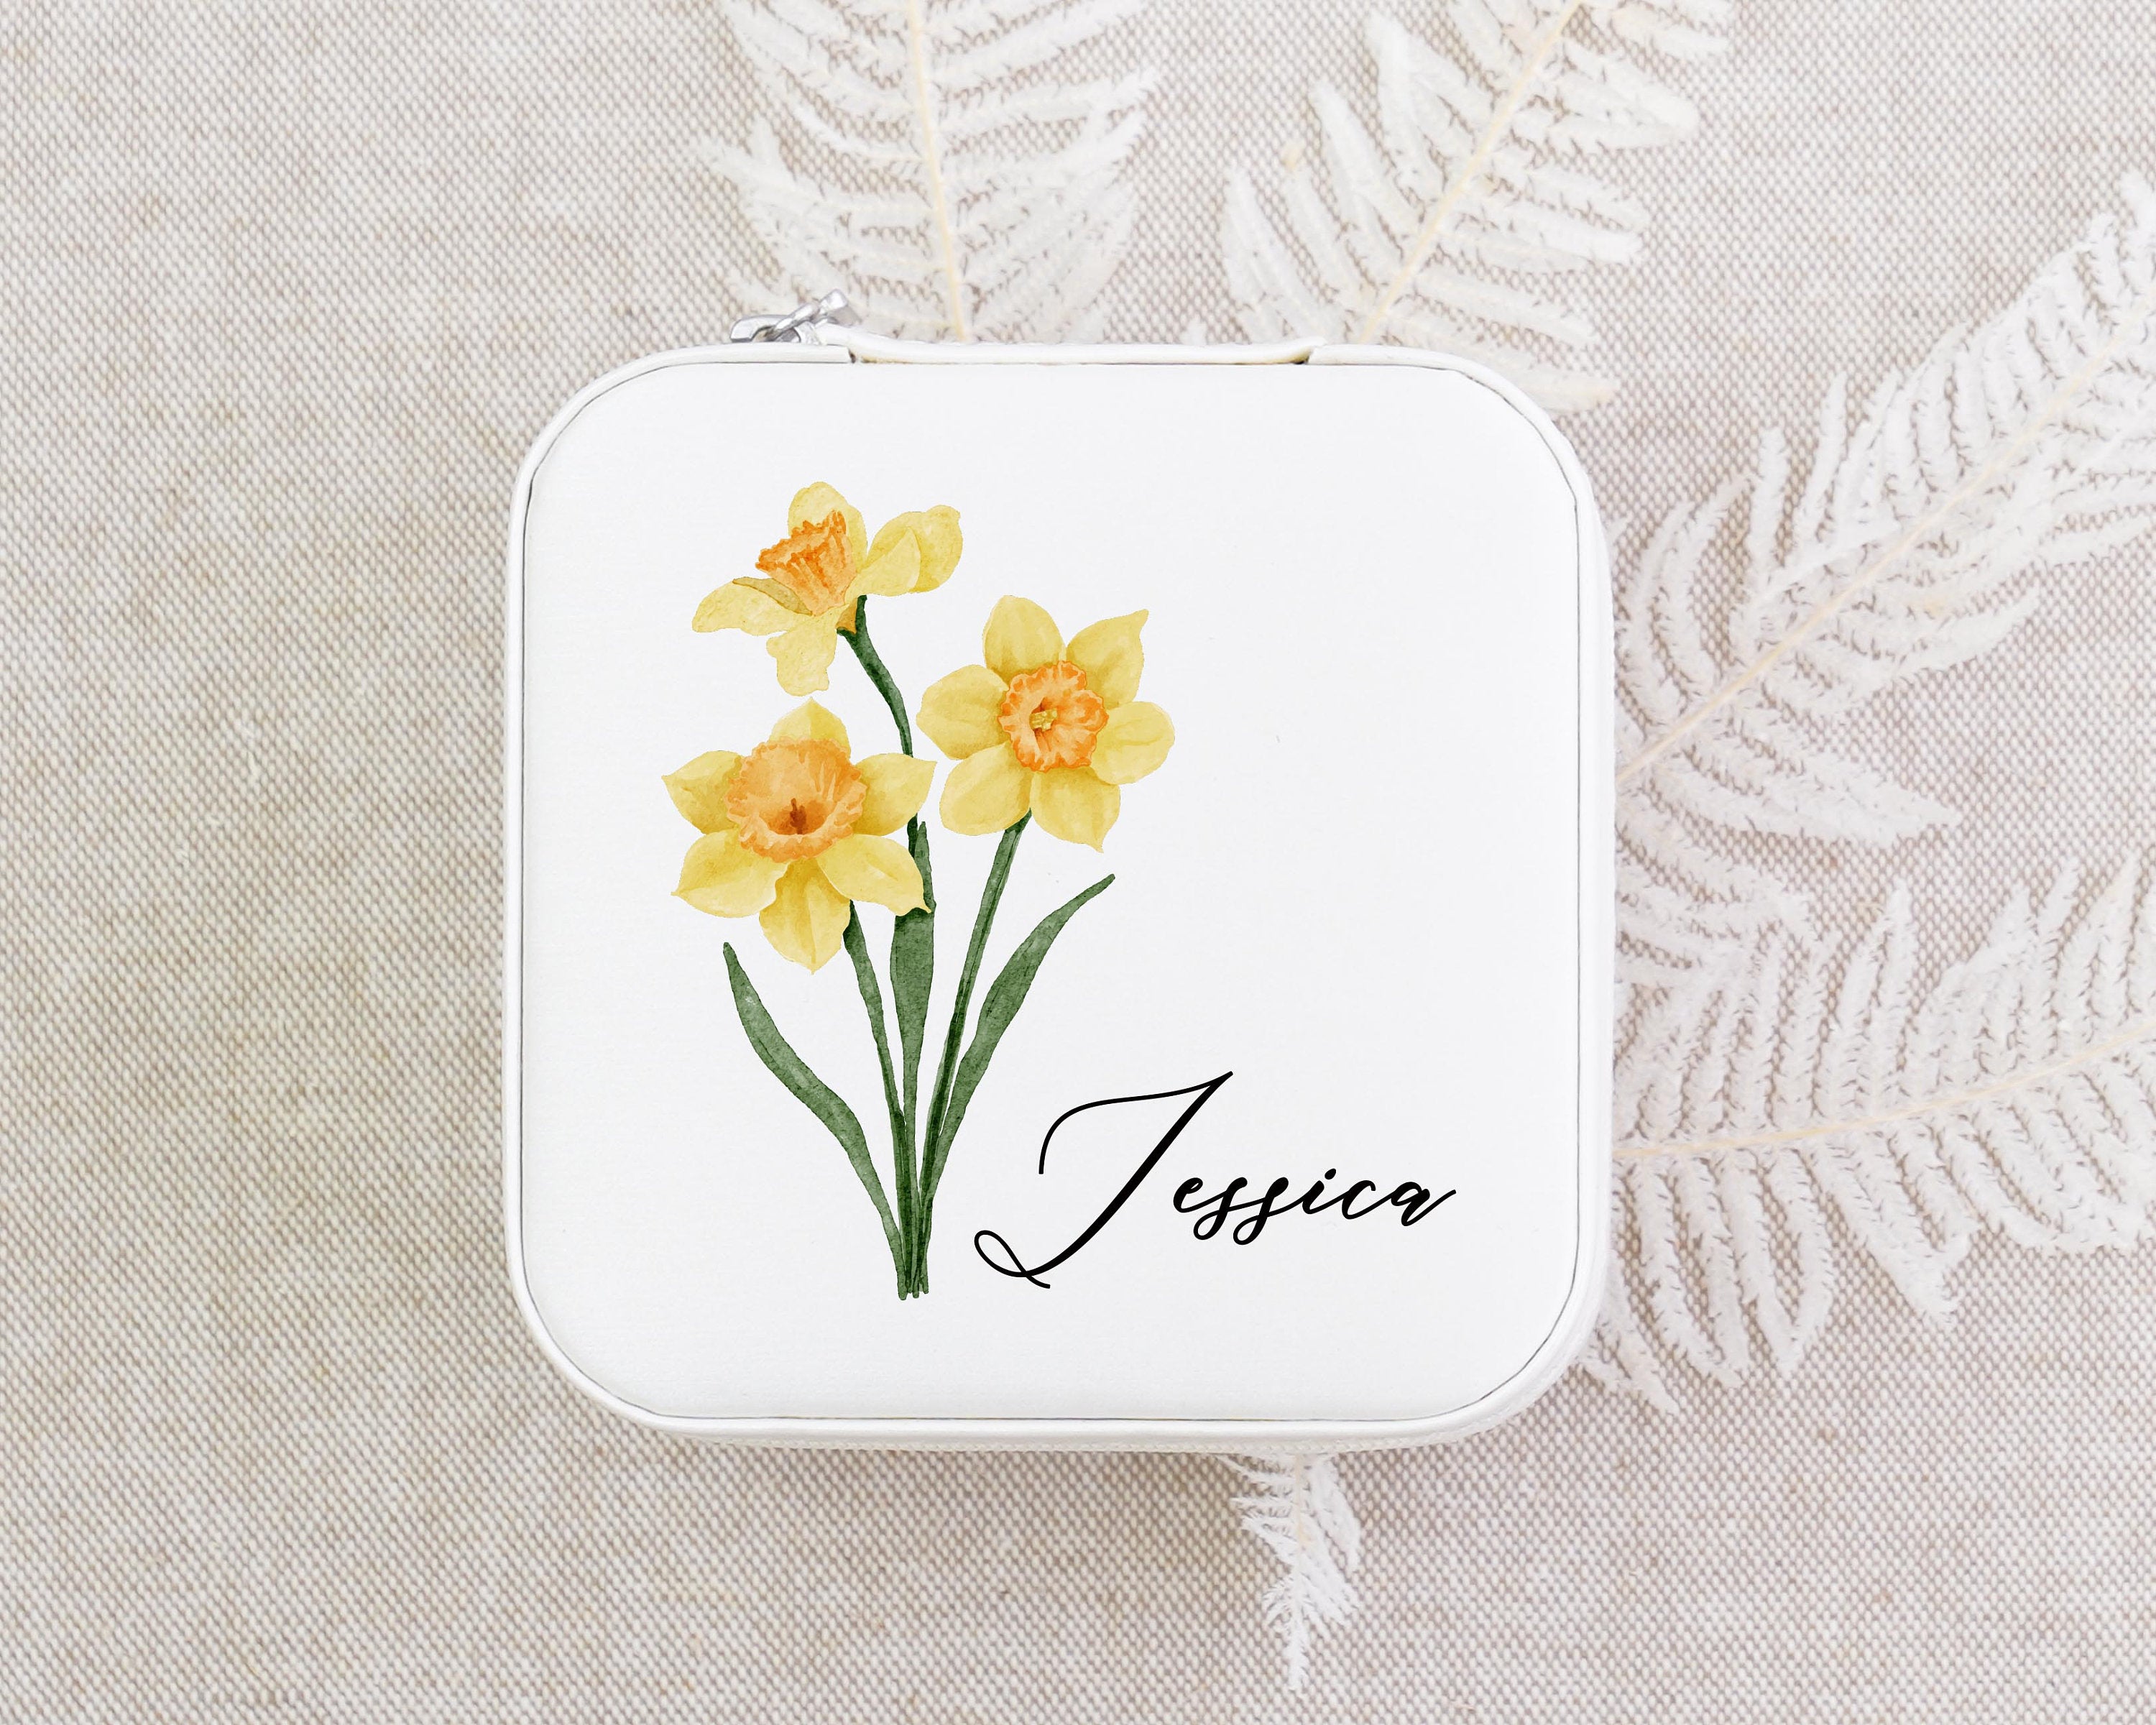 a small tin with some yellow flowers on it